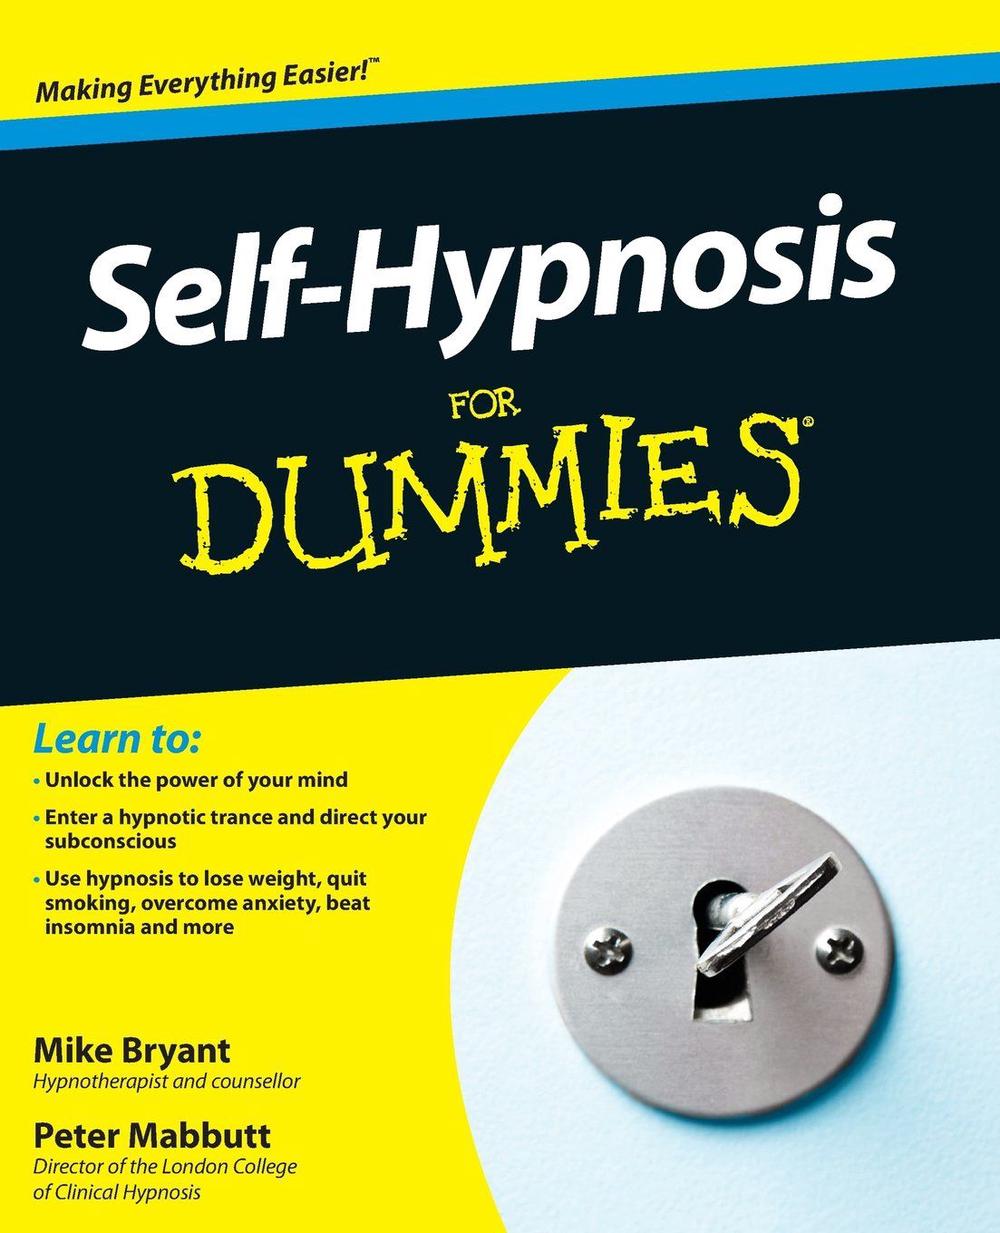 Self-Hypnosis For Dummies by Mike Bryant (English) Paperback Book Free Shipping!